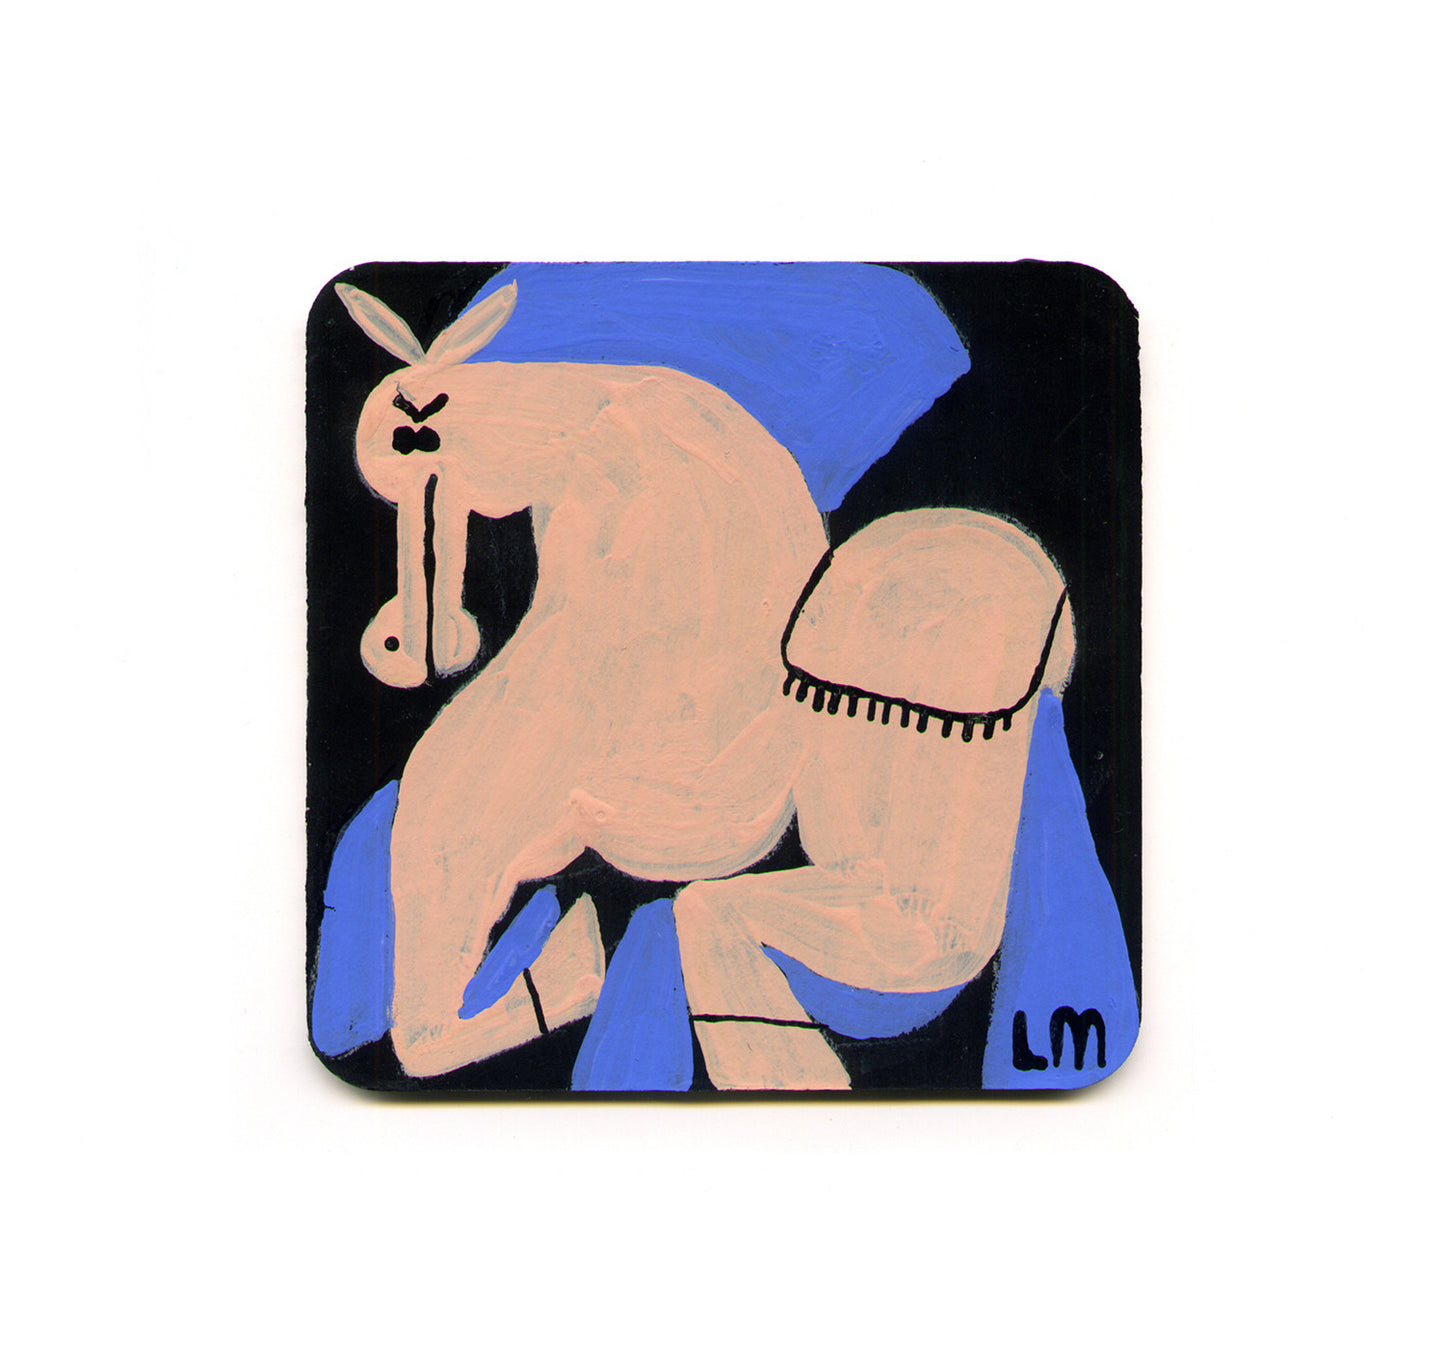 S1 Llew Mejia - Wild Crazy Angry Horse Coaster